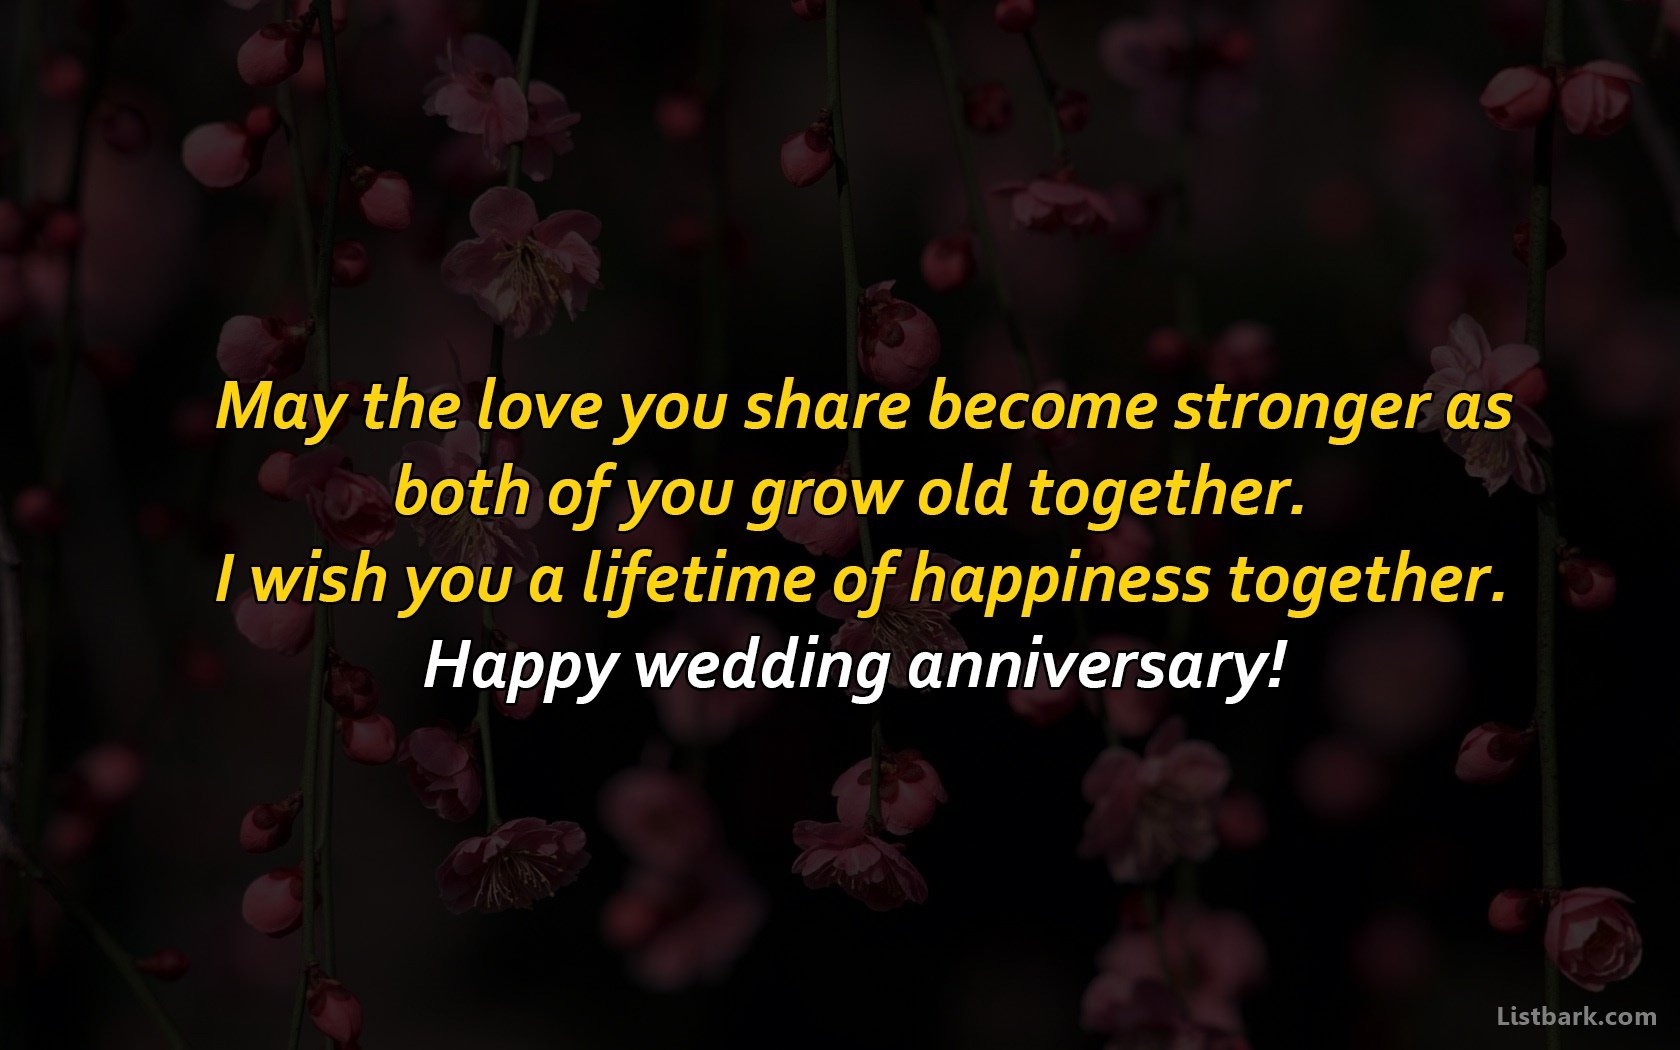 Anniversary Messages for Parents